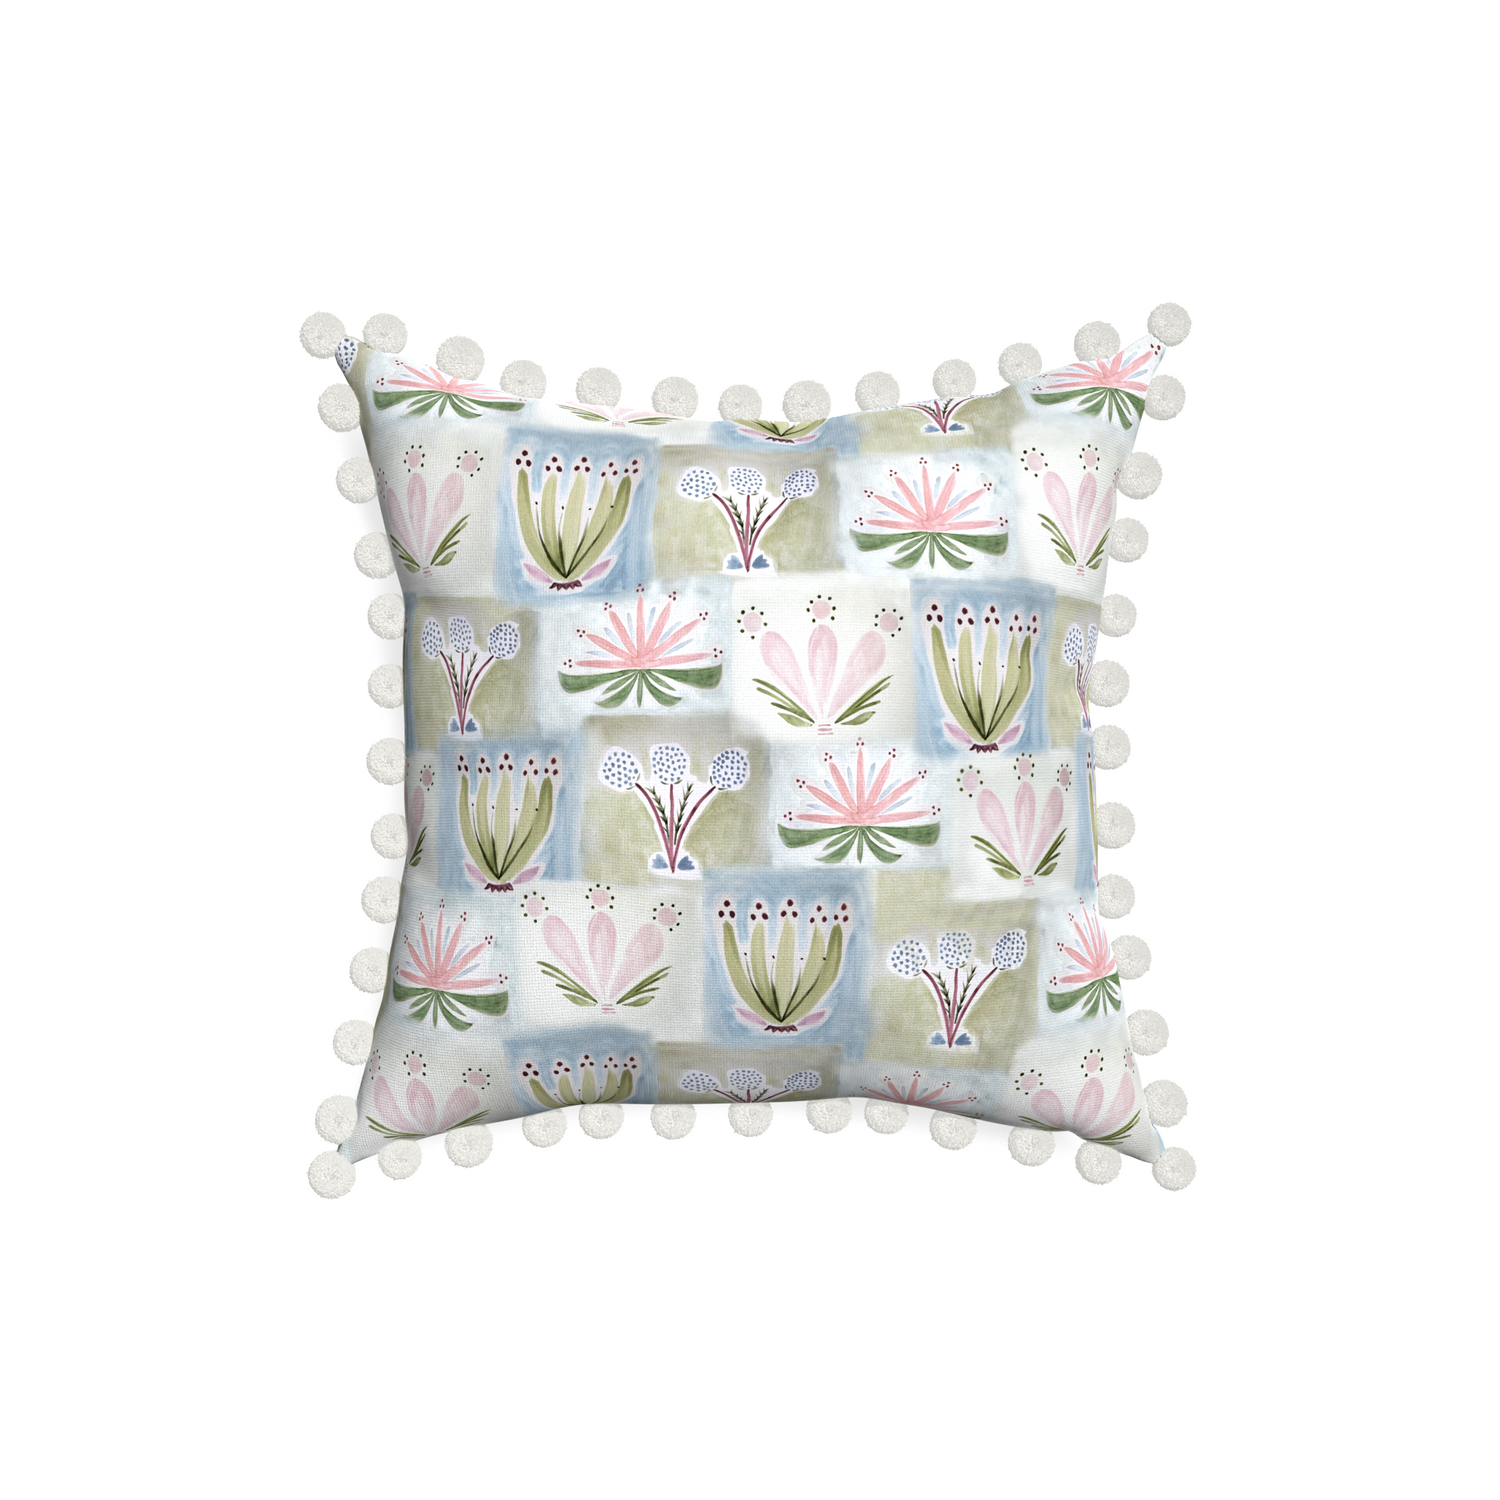 18-square harper custom hand-painted floralpillow with snow pom pom on white background